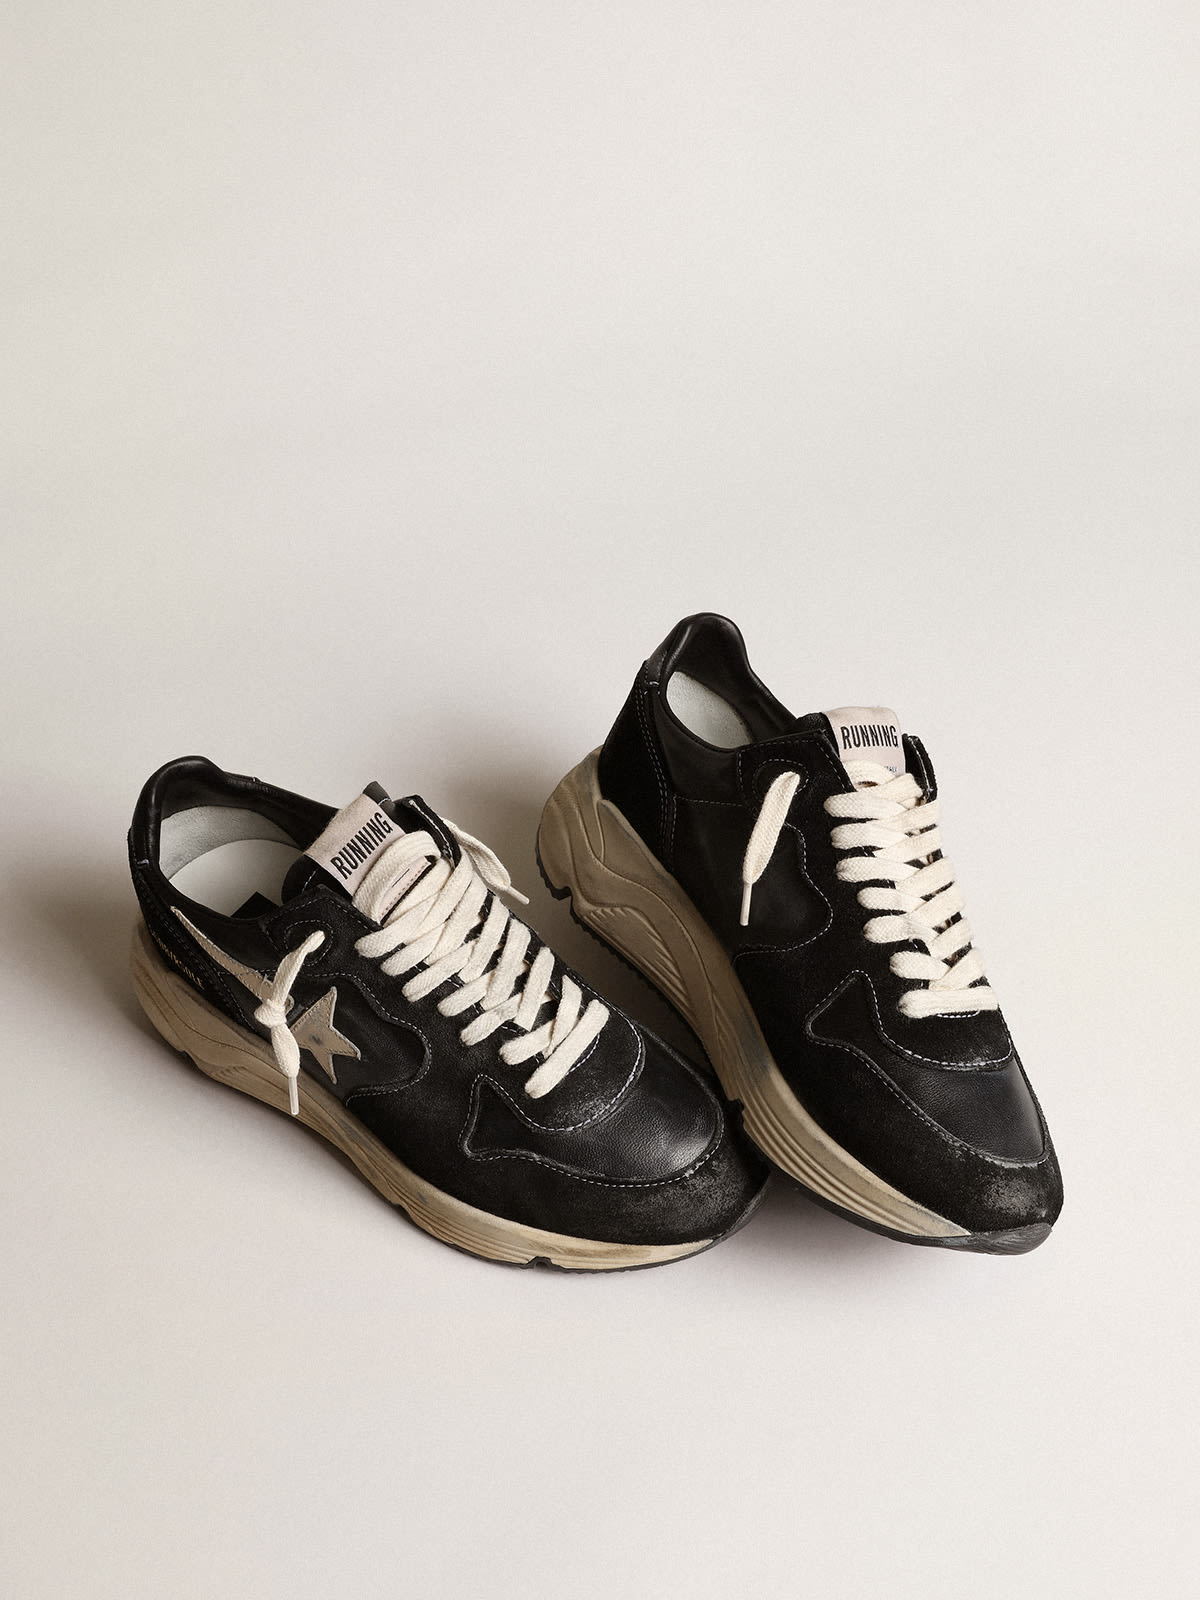 Golden Goose - Women’s Running Sole in black nappa and suede with white star in 